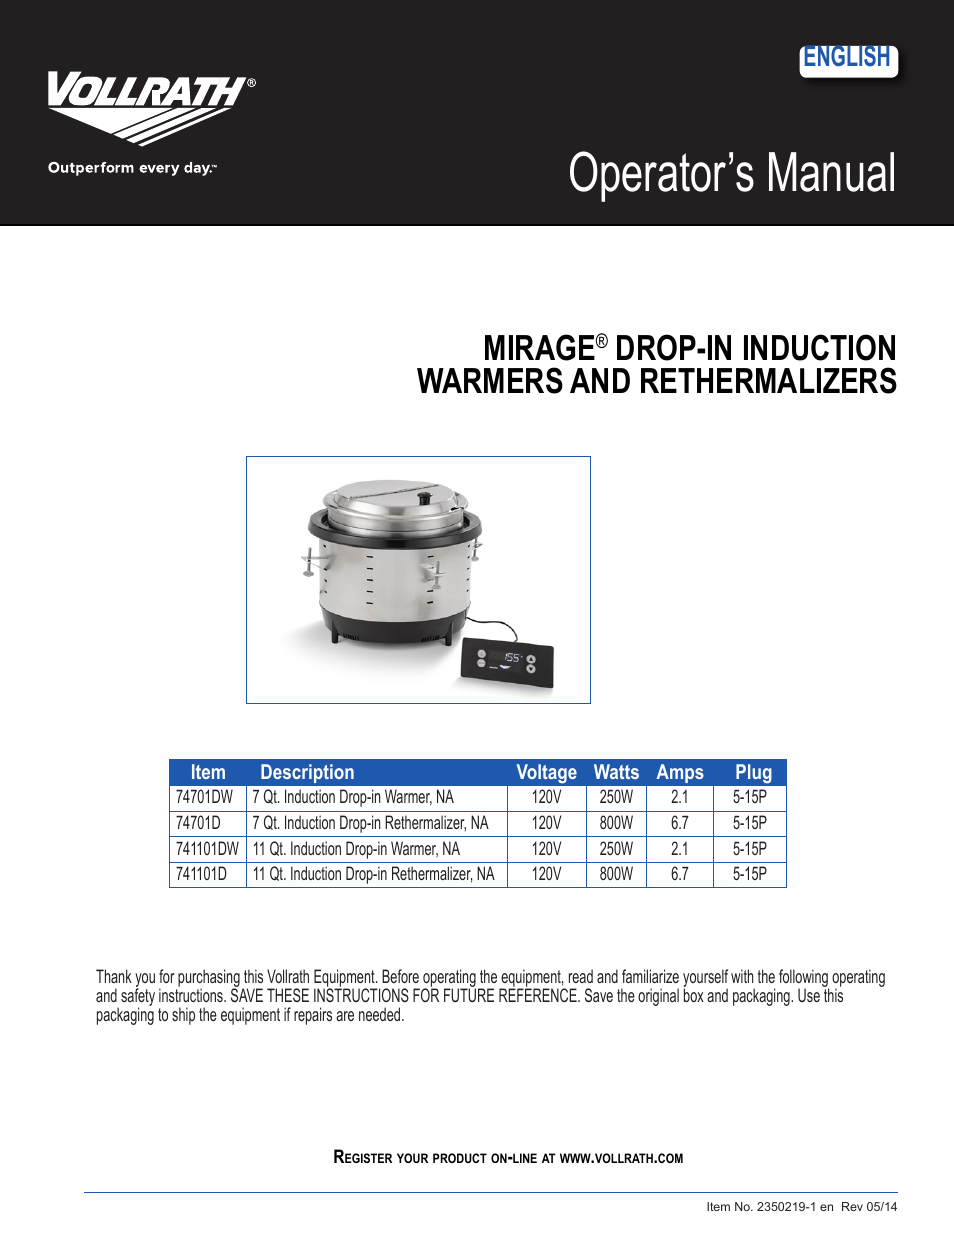 Mirage Drop-In Induction Warmers 7 Qt